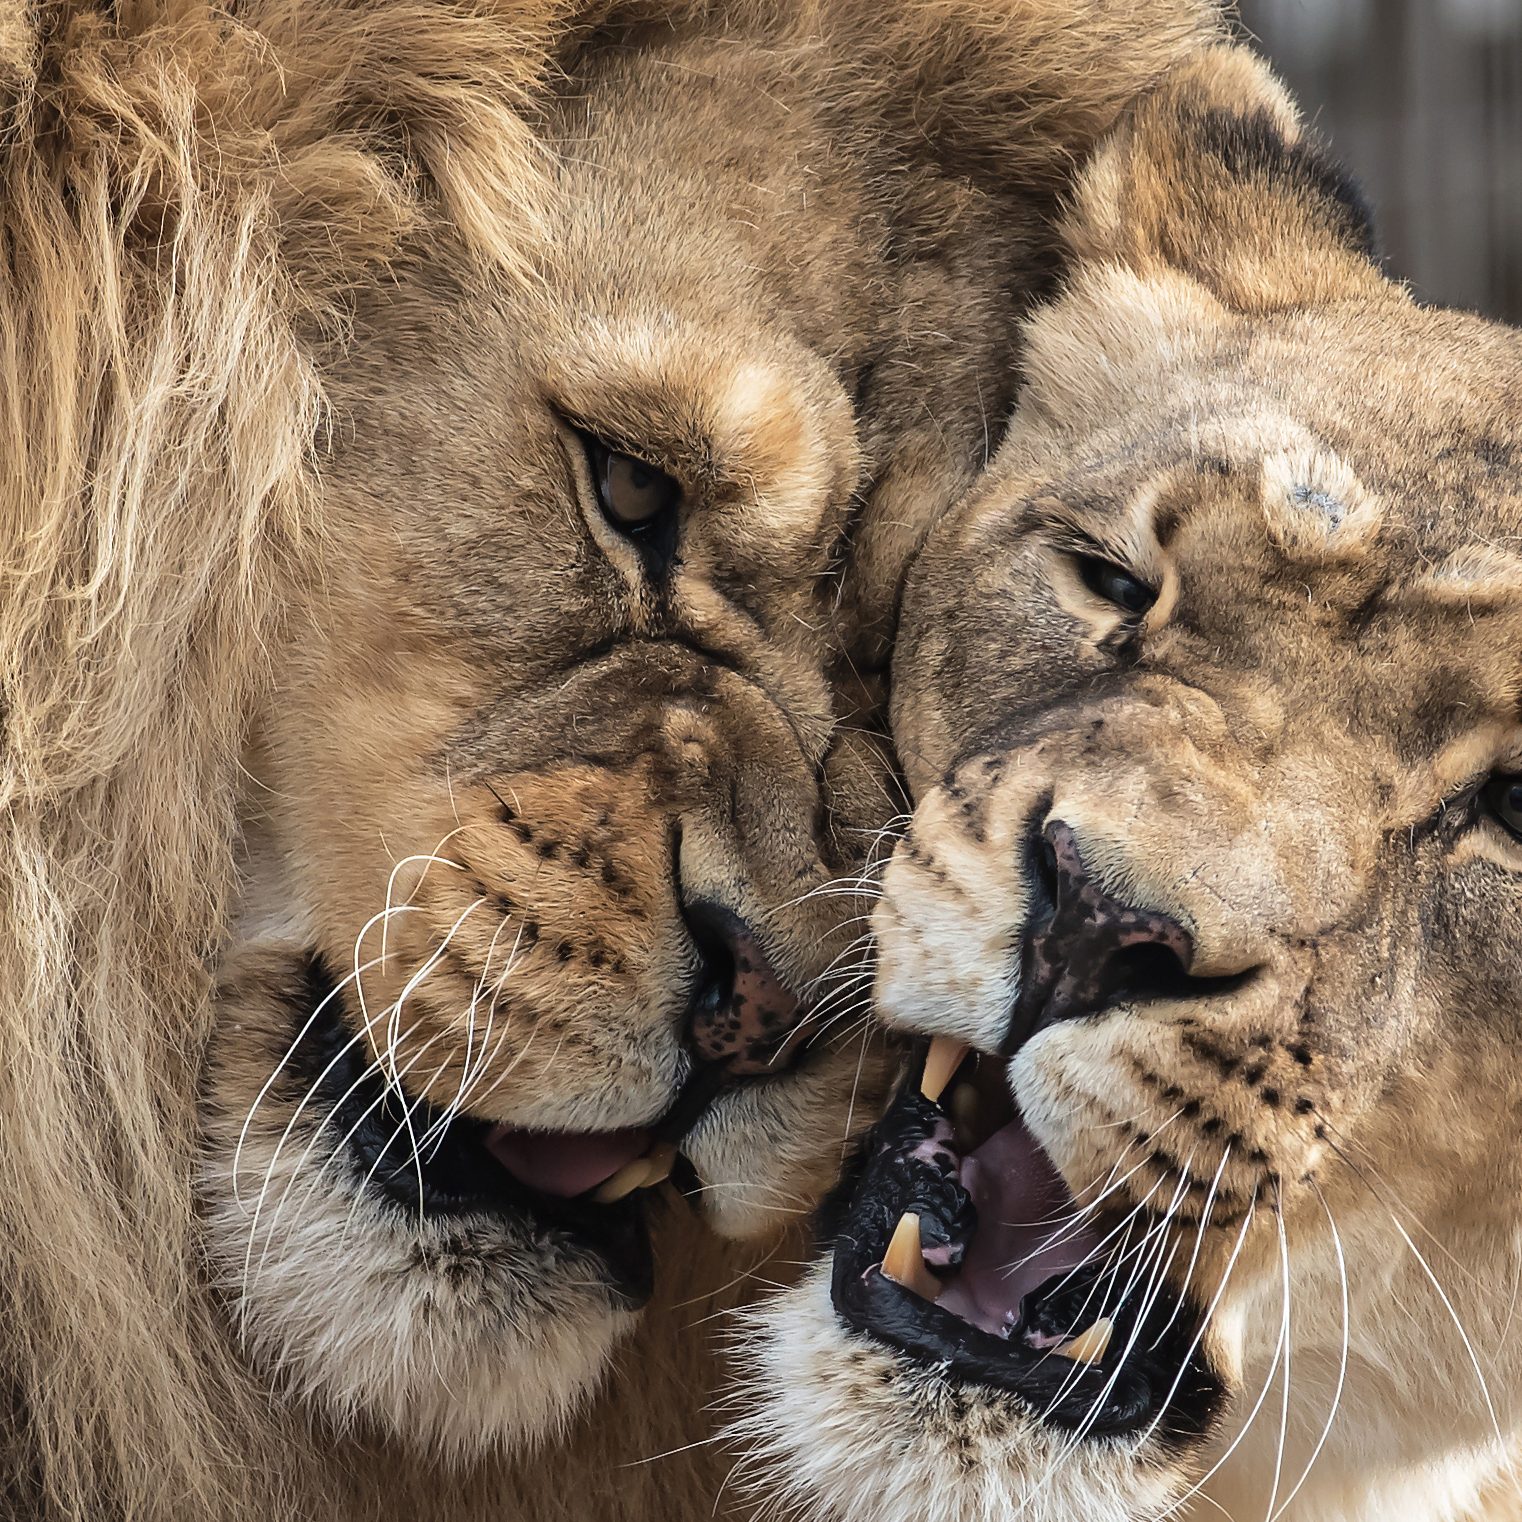 PHOTO #3 LION LOVE CATEGORY ANIMAL GROUP